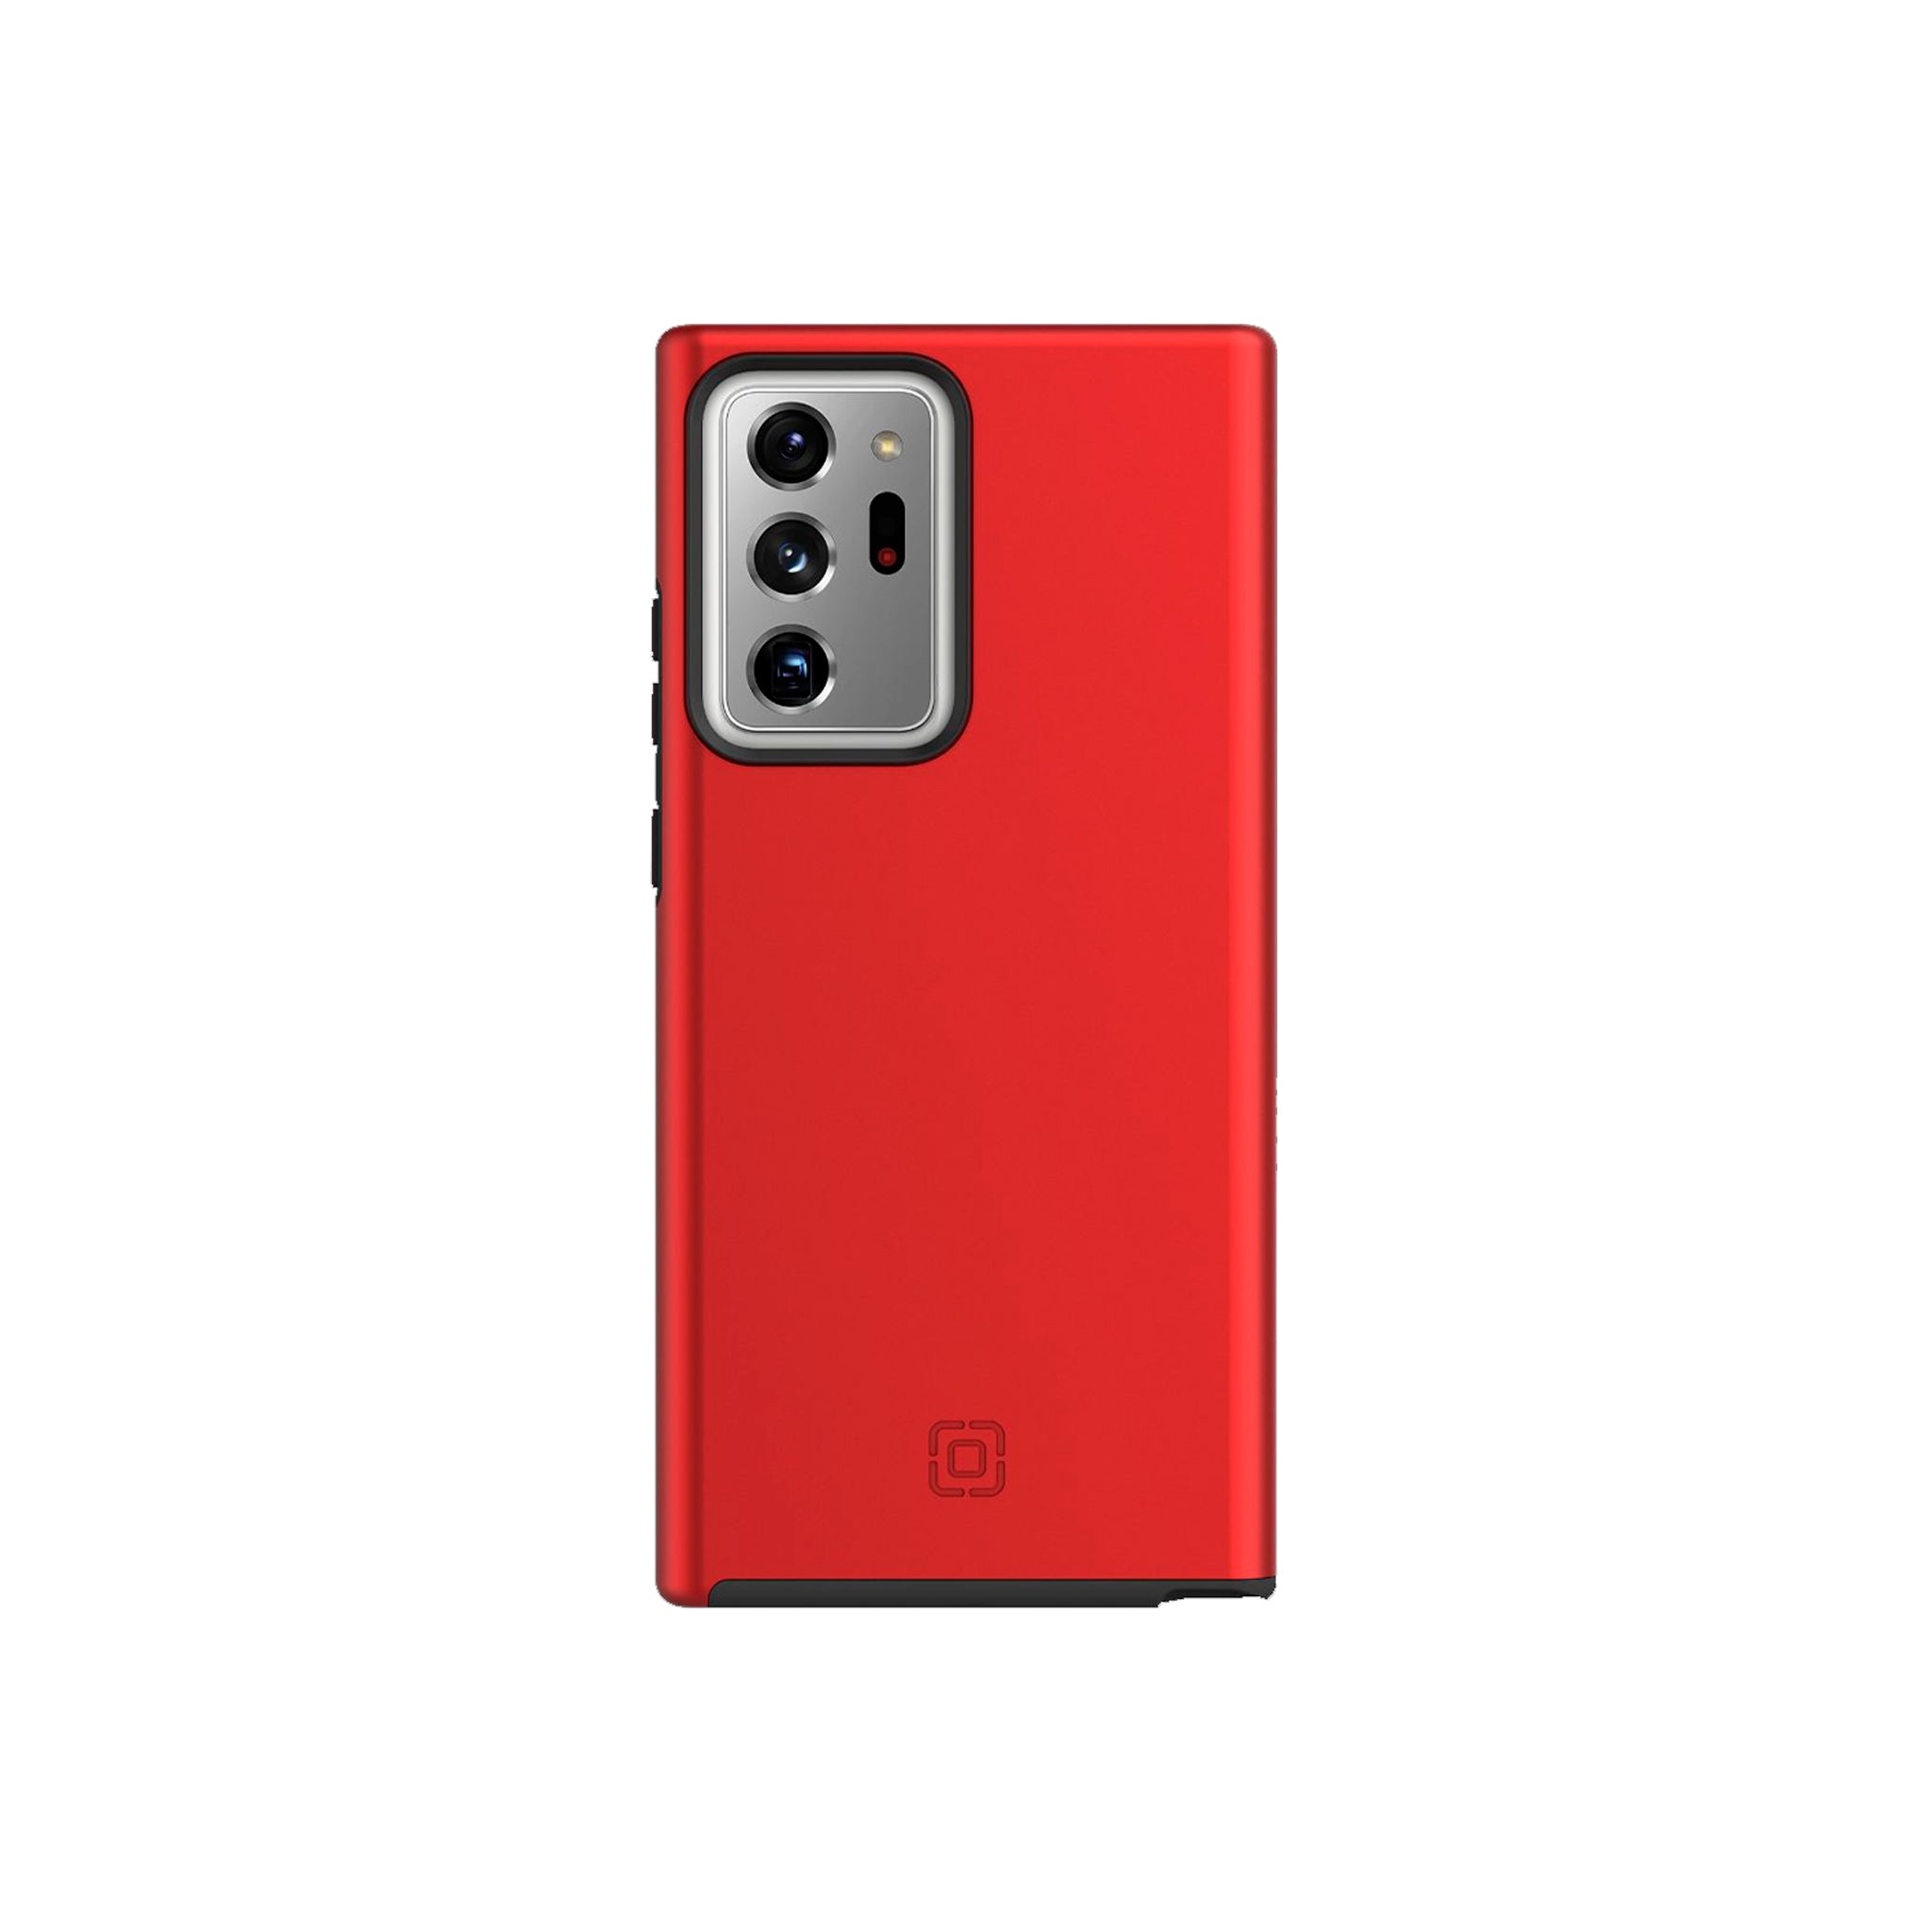 Incipio - DualPro Case For Samsung Galaxy Note20 Ultra 5g - Iridescent Red And Black